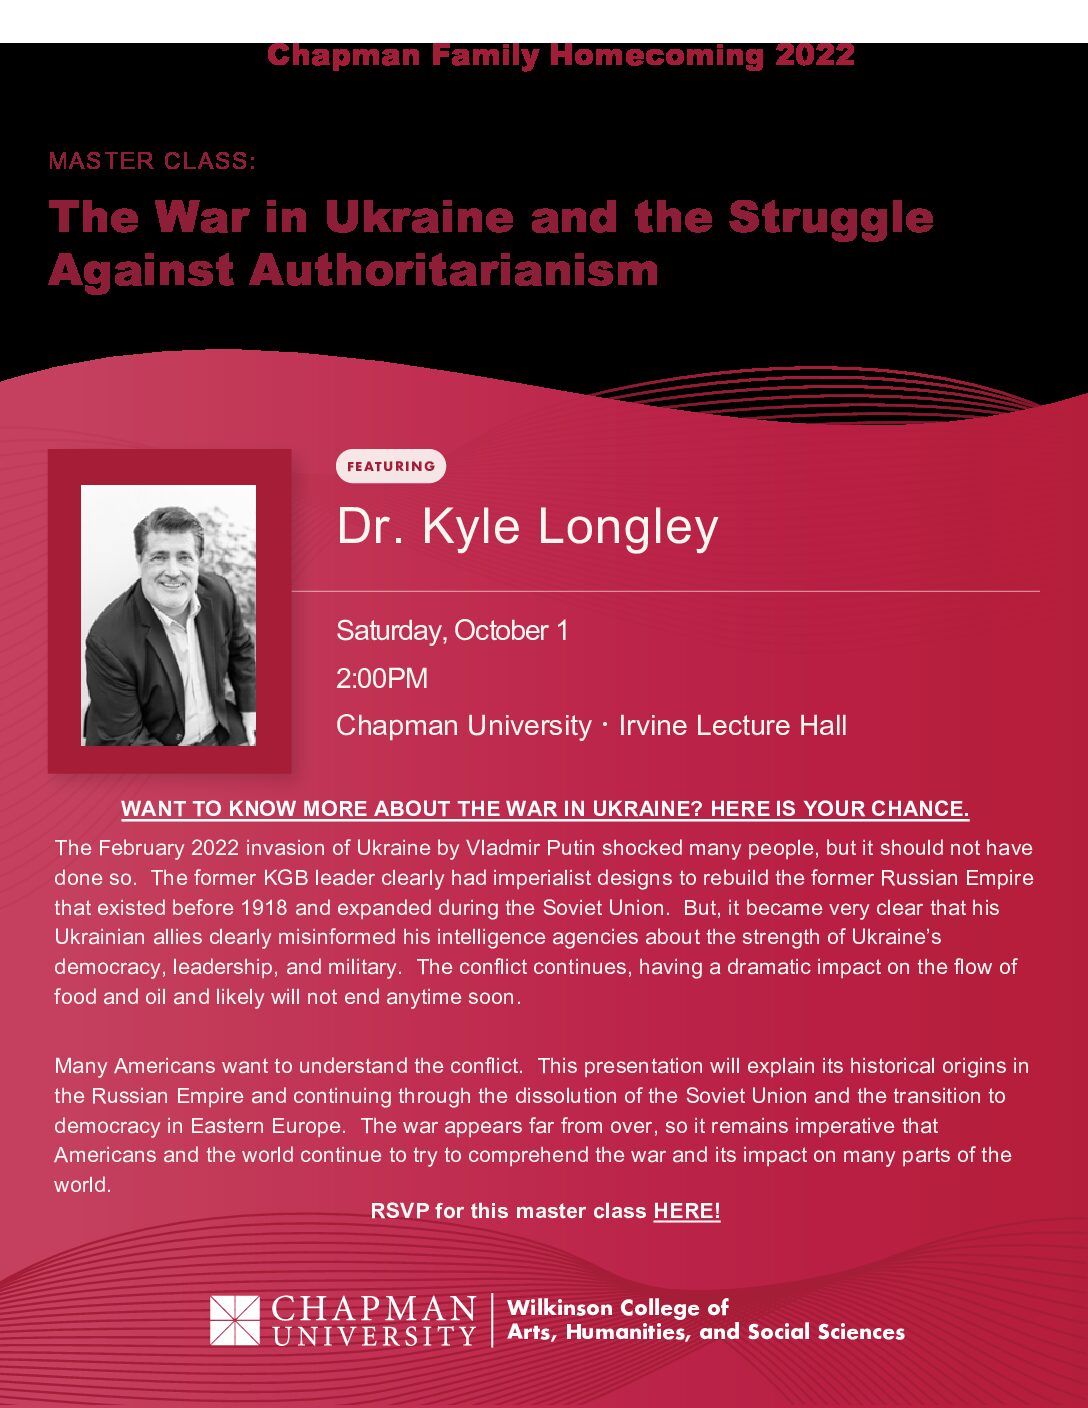 Master Class: The War in Ukraine and the Struggle Against Authoritarianism